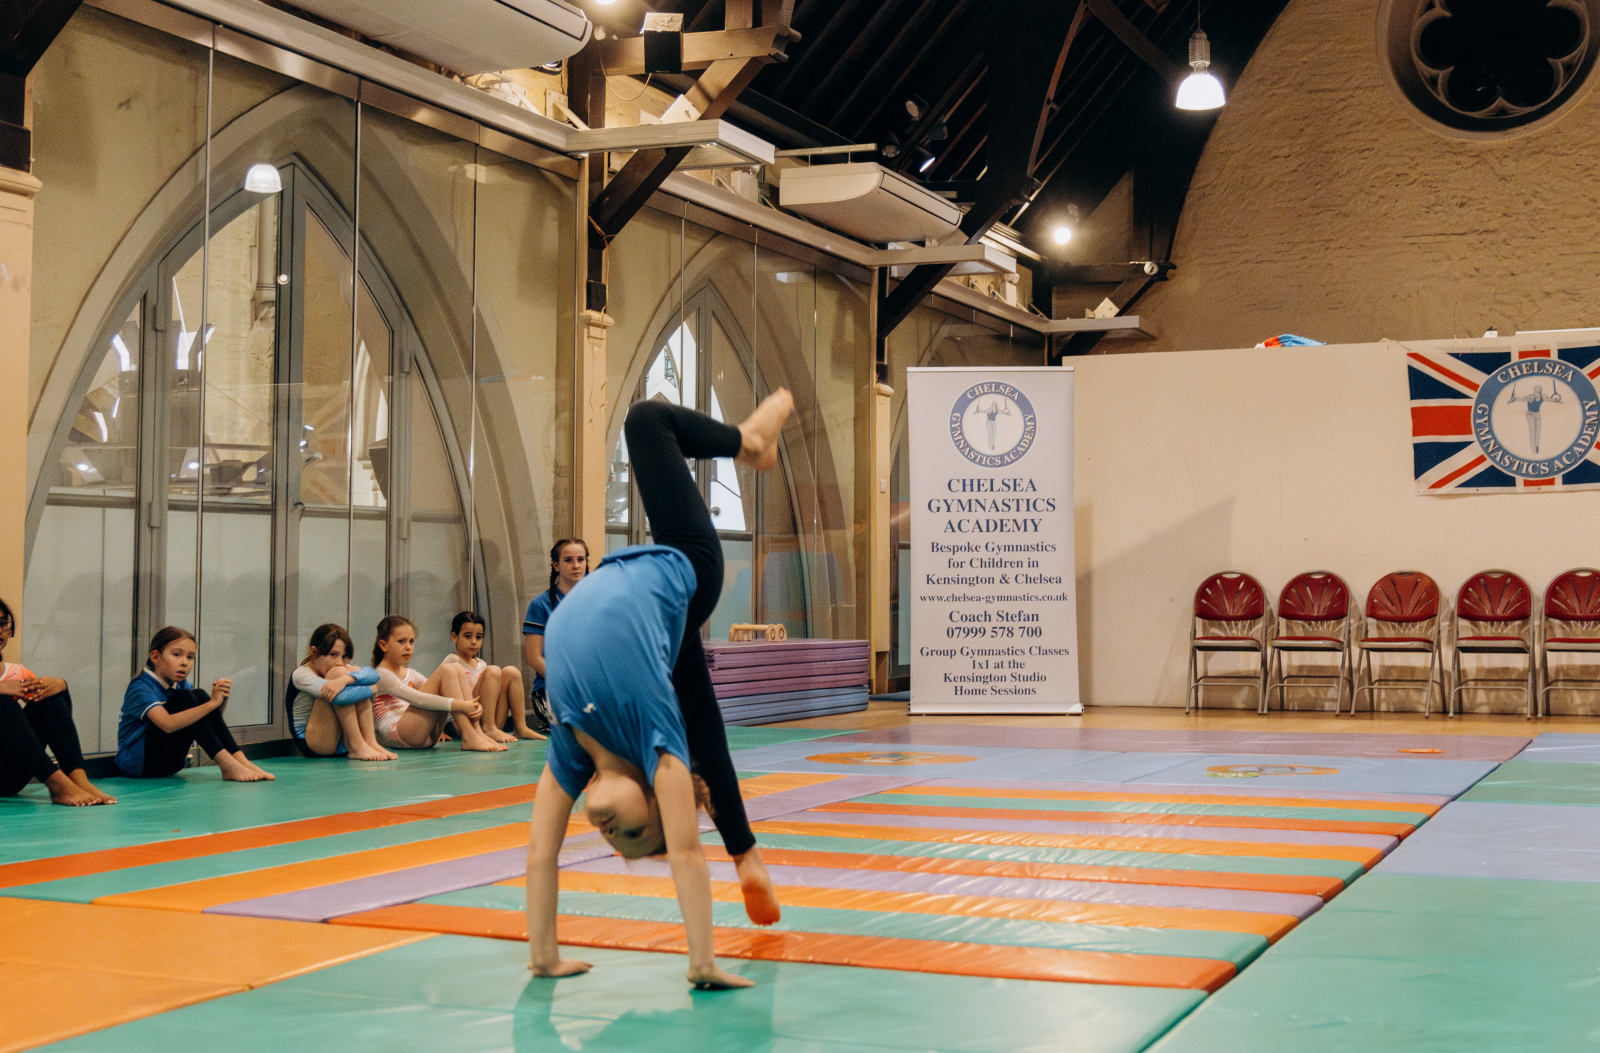 Flexibility for gymnasts in Kensington and Chelsea